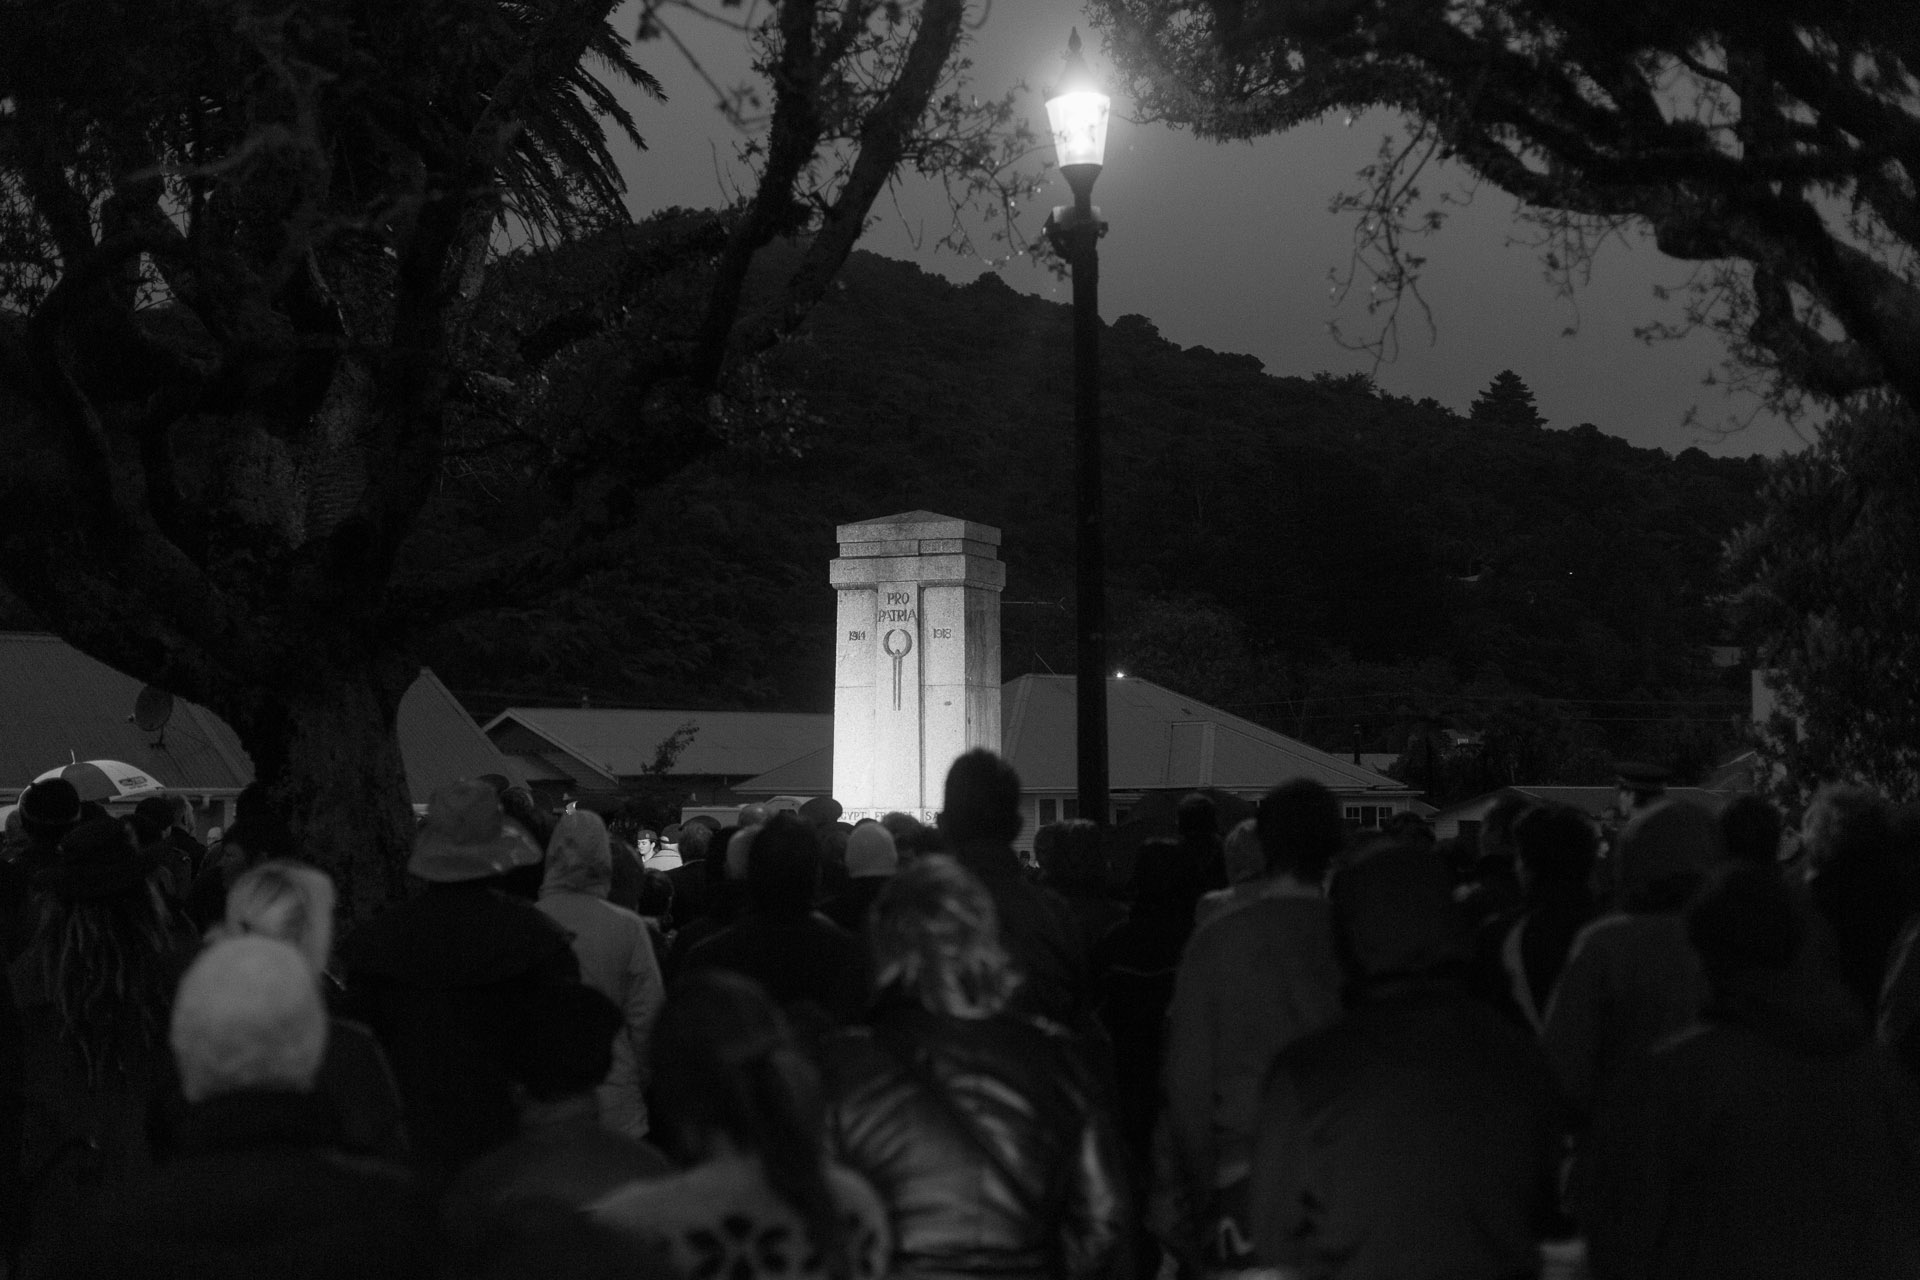 Crowds at the Greymouth for the ANZAC dawn service.